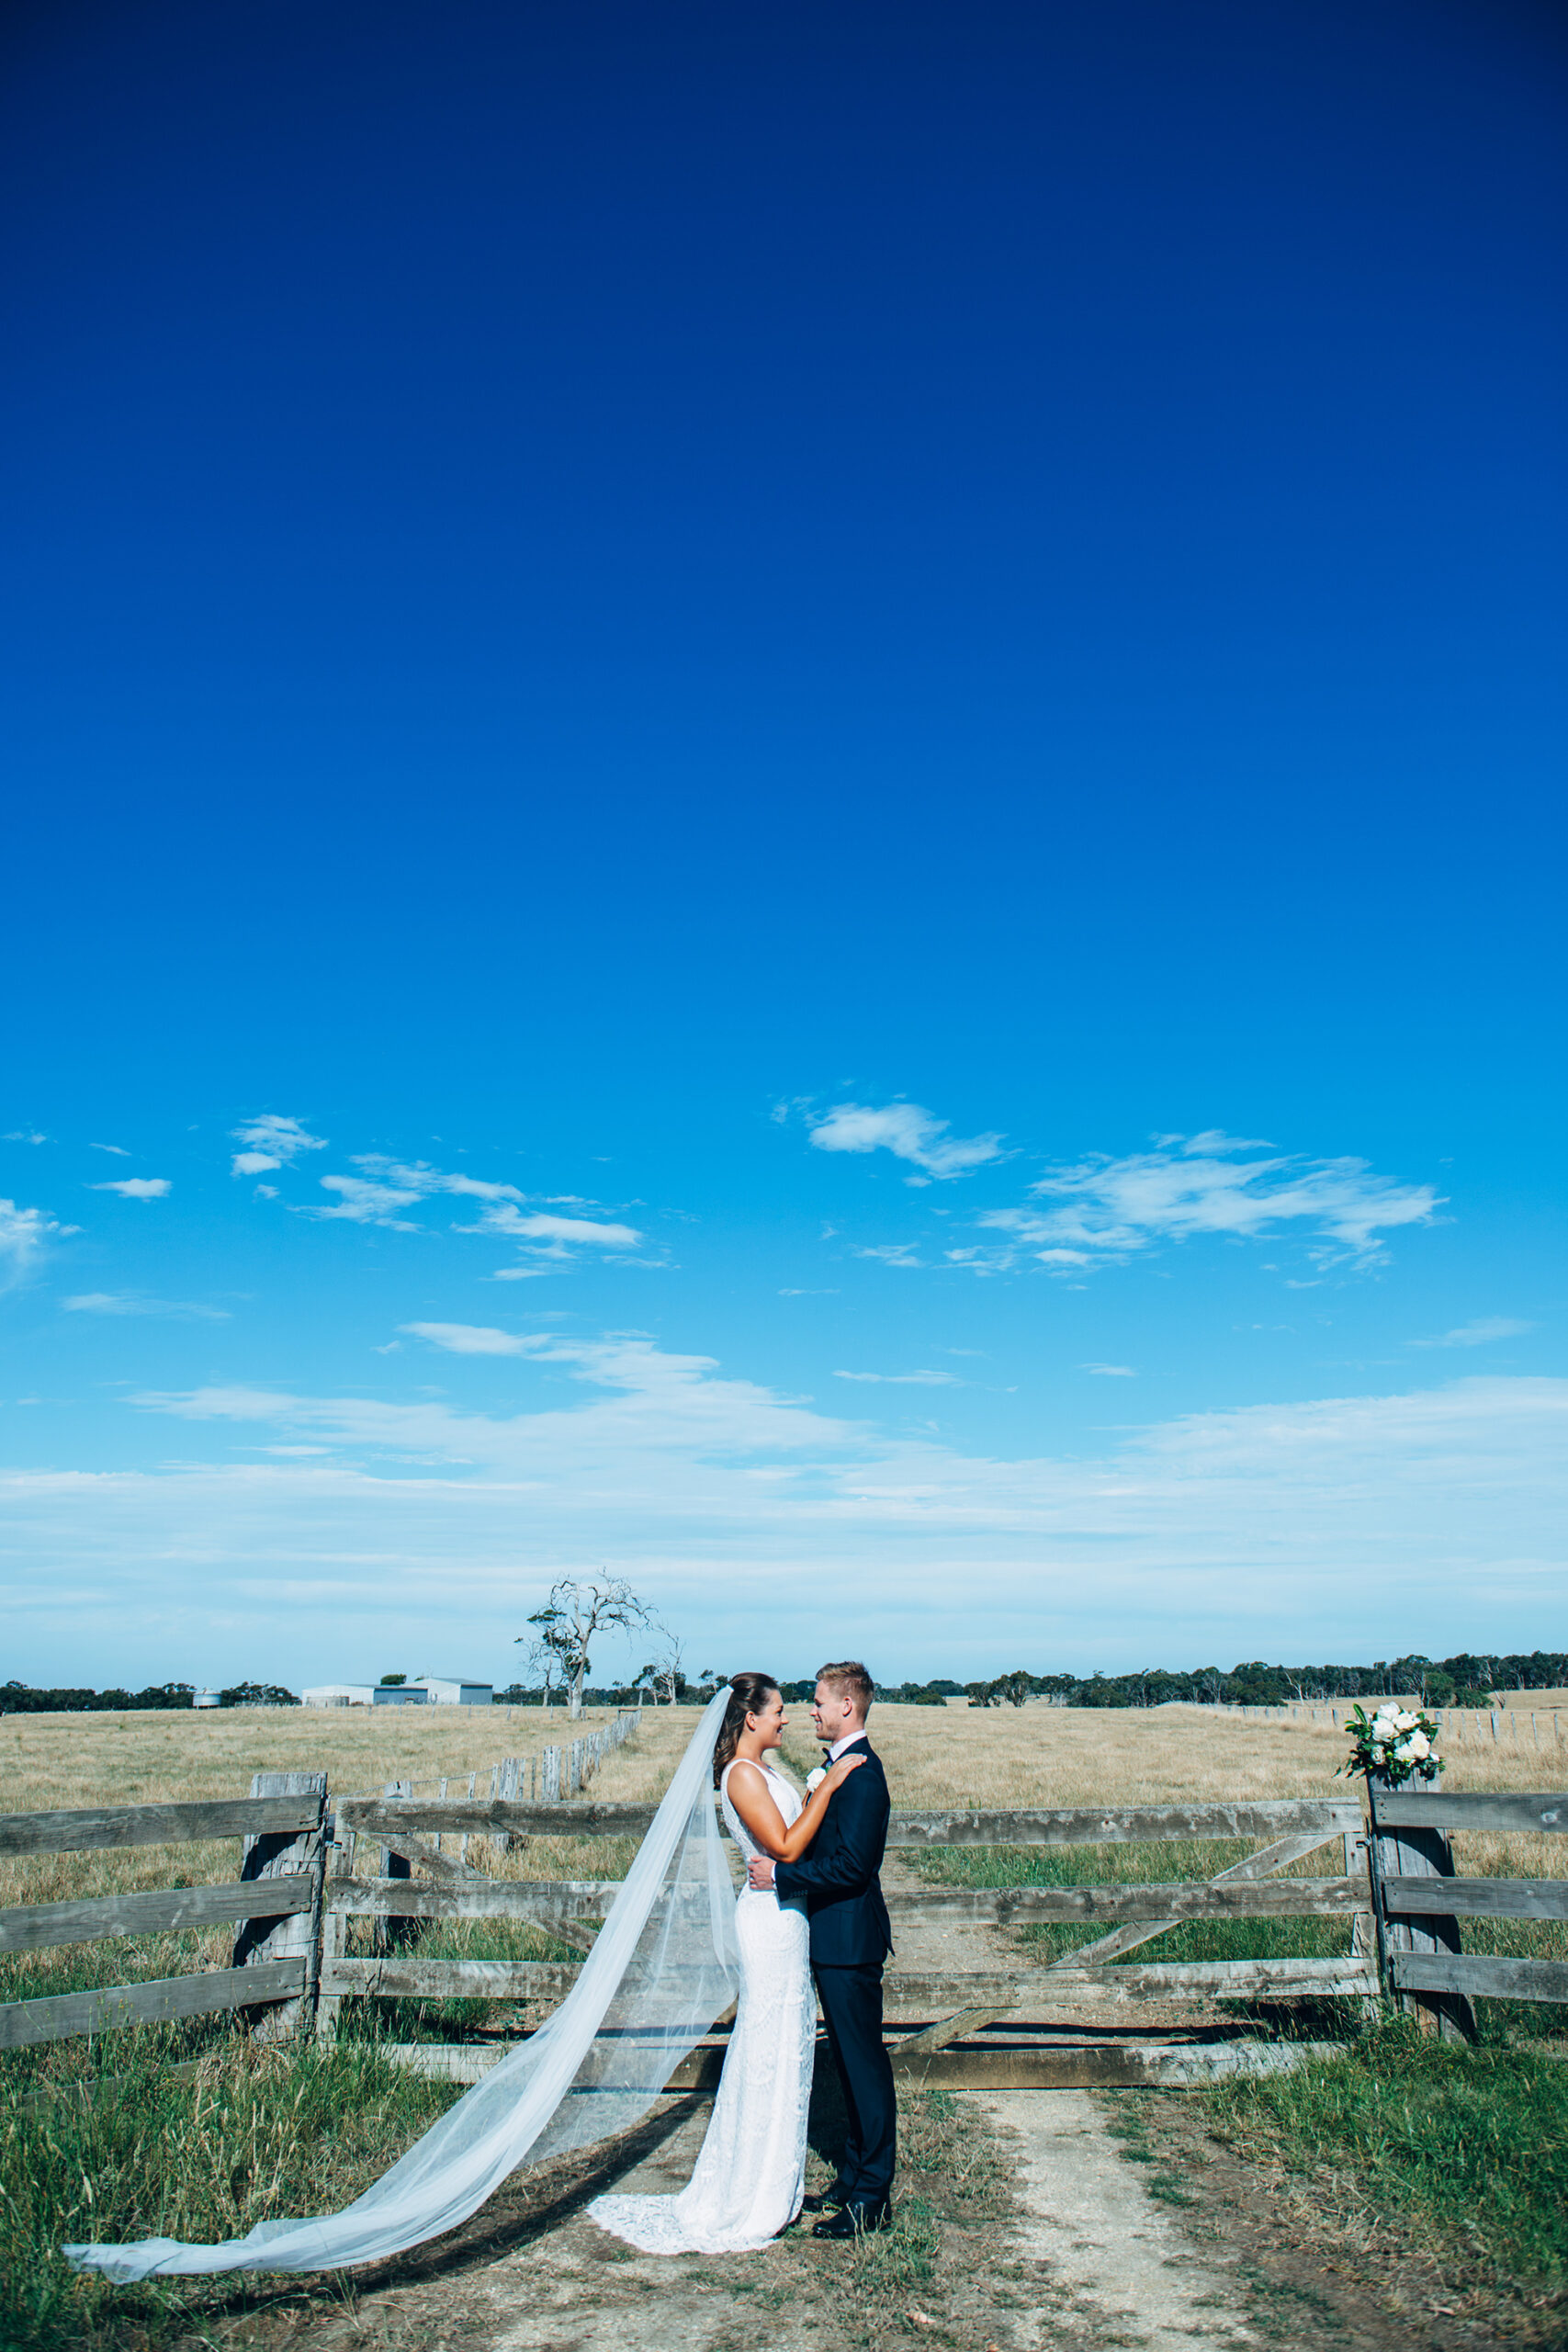 Danielle Seamus Elegant Rustic Wedding Love Other Photography SBS 017 scaled